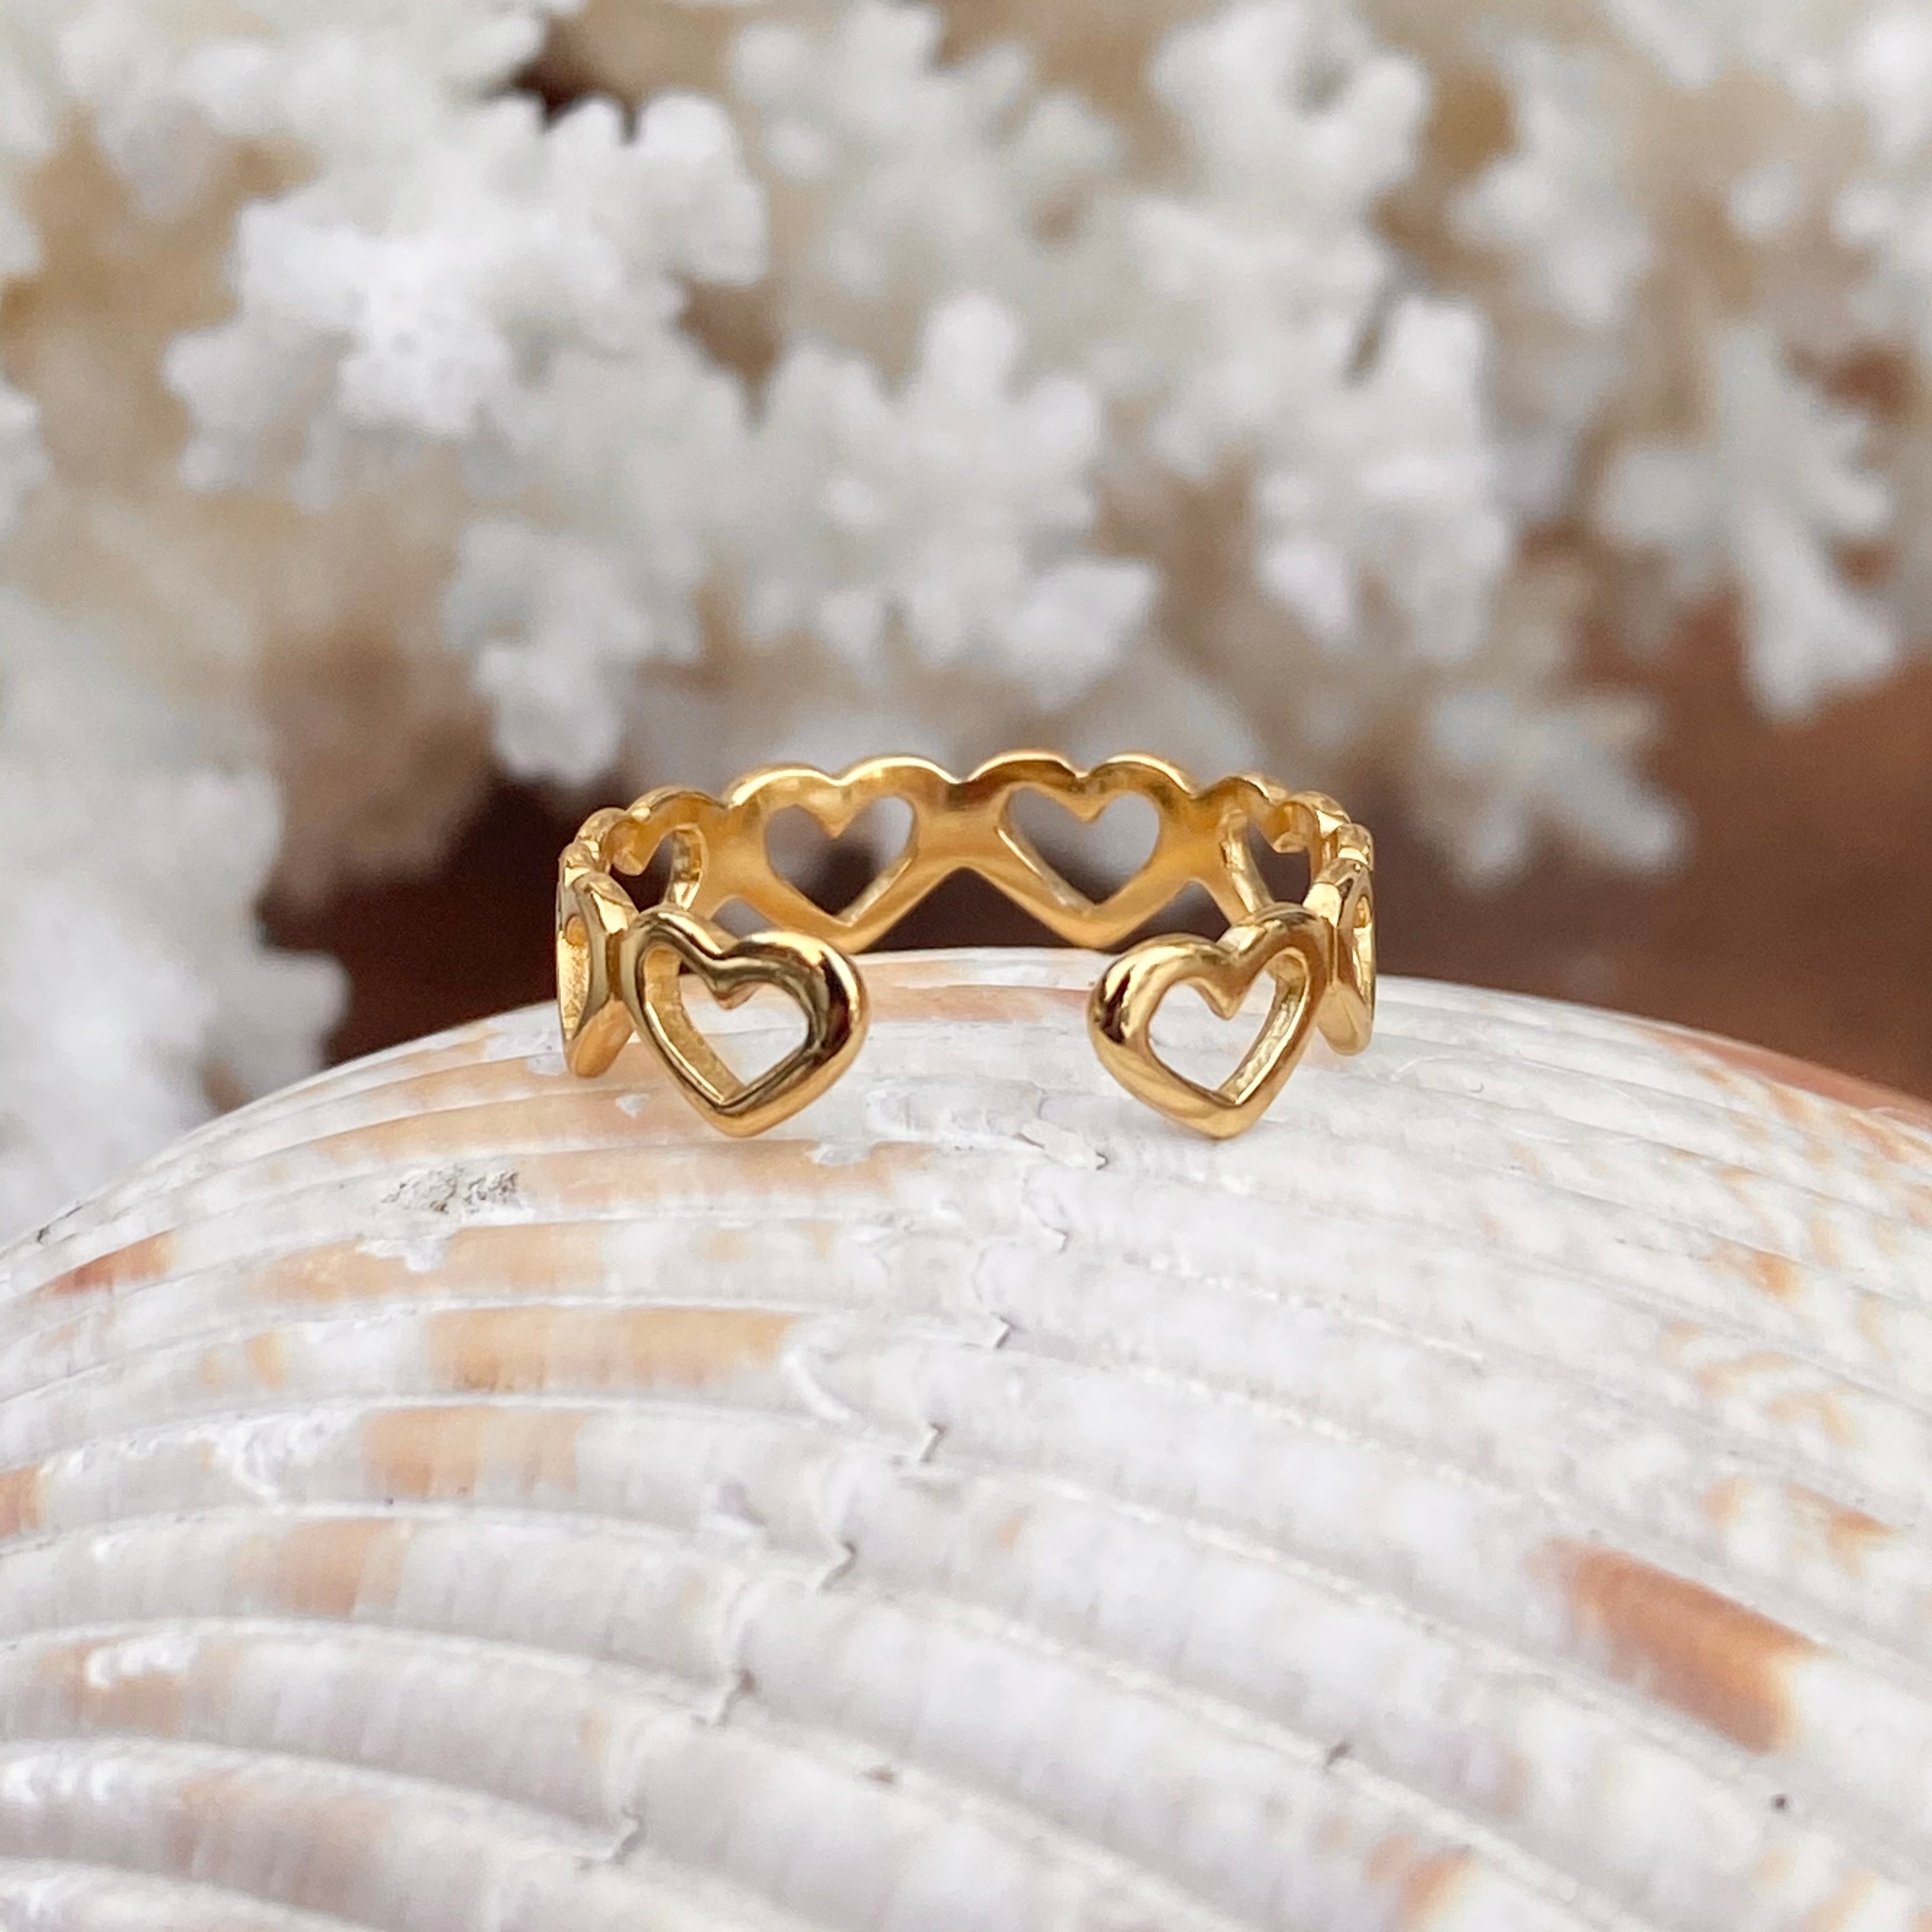 14K Gold Plated Silver Toe Rings for Women, Girls. Adjustable Hawaiian  Toering, Pinky Ring, Midi, Knuckle Ring. Ocean Beach Jewelry. - Etsy Finland